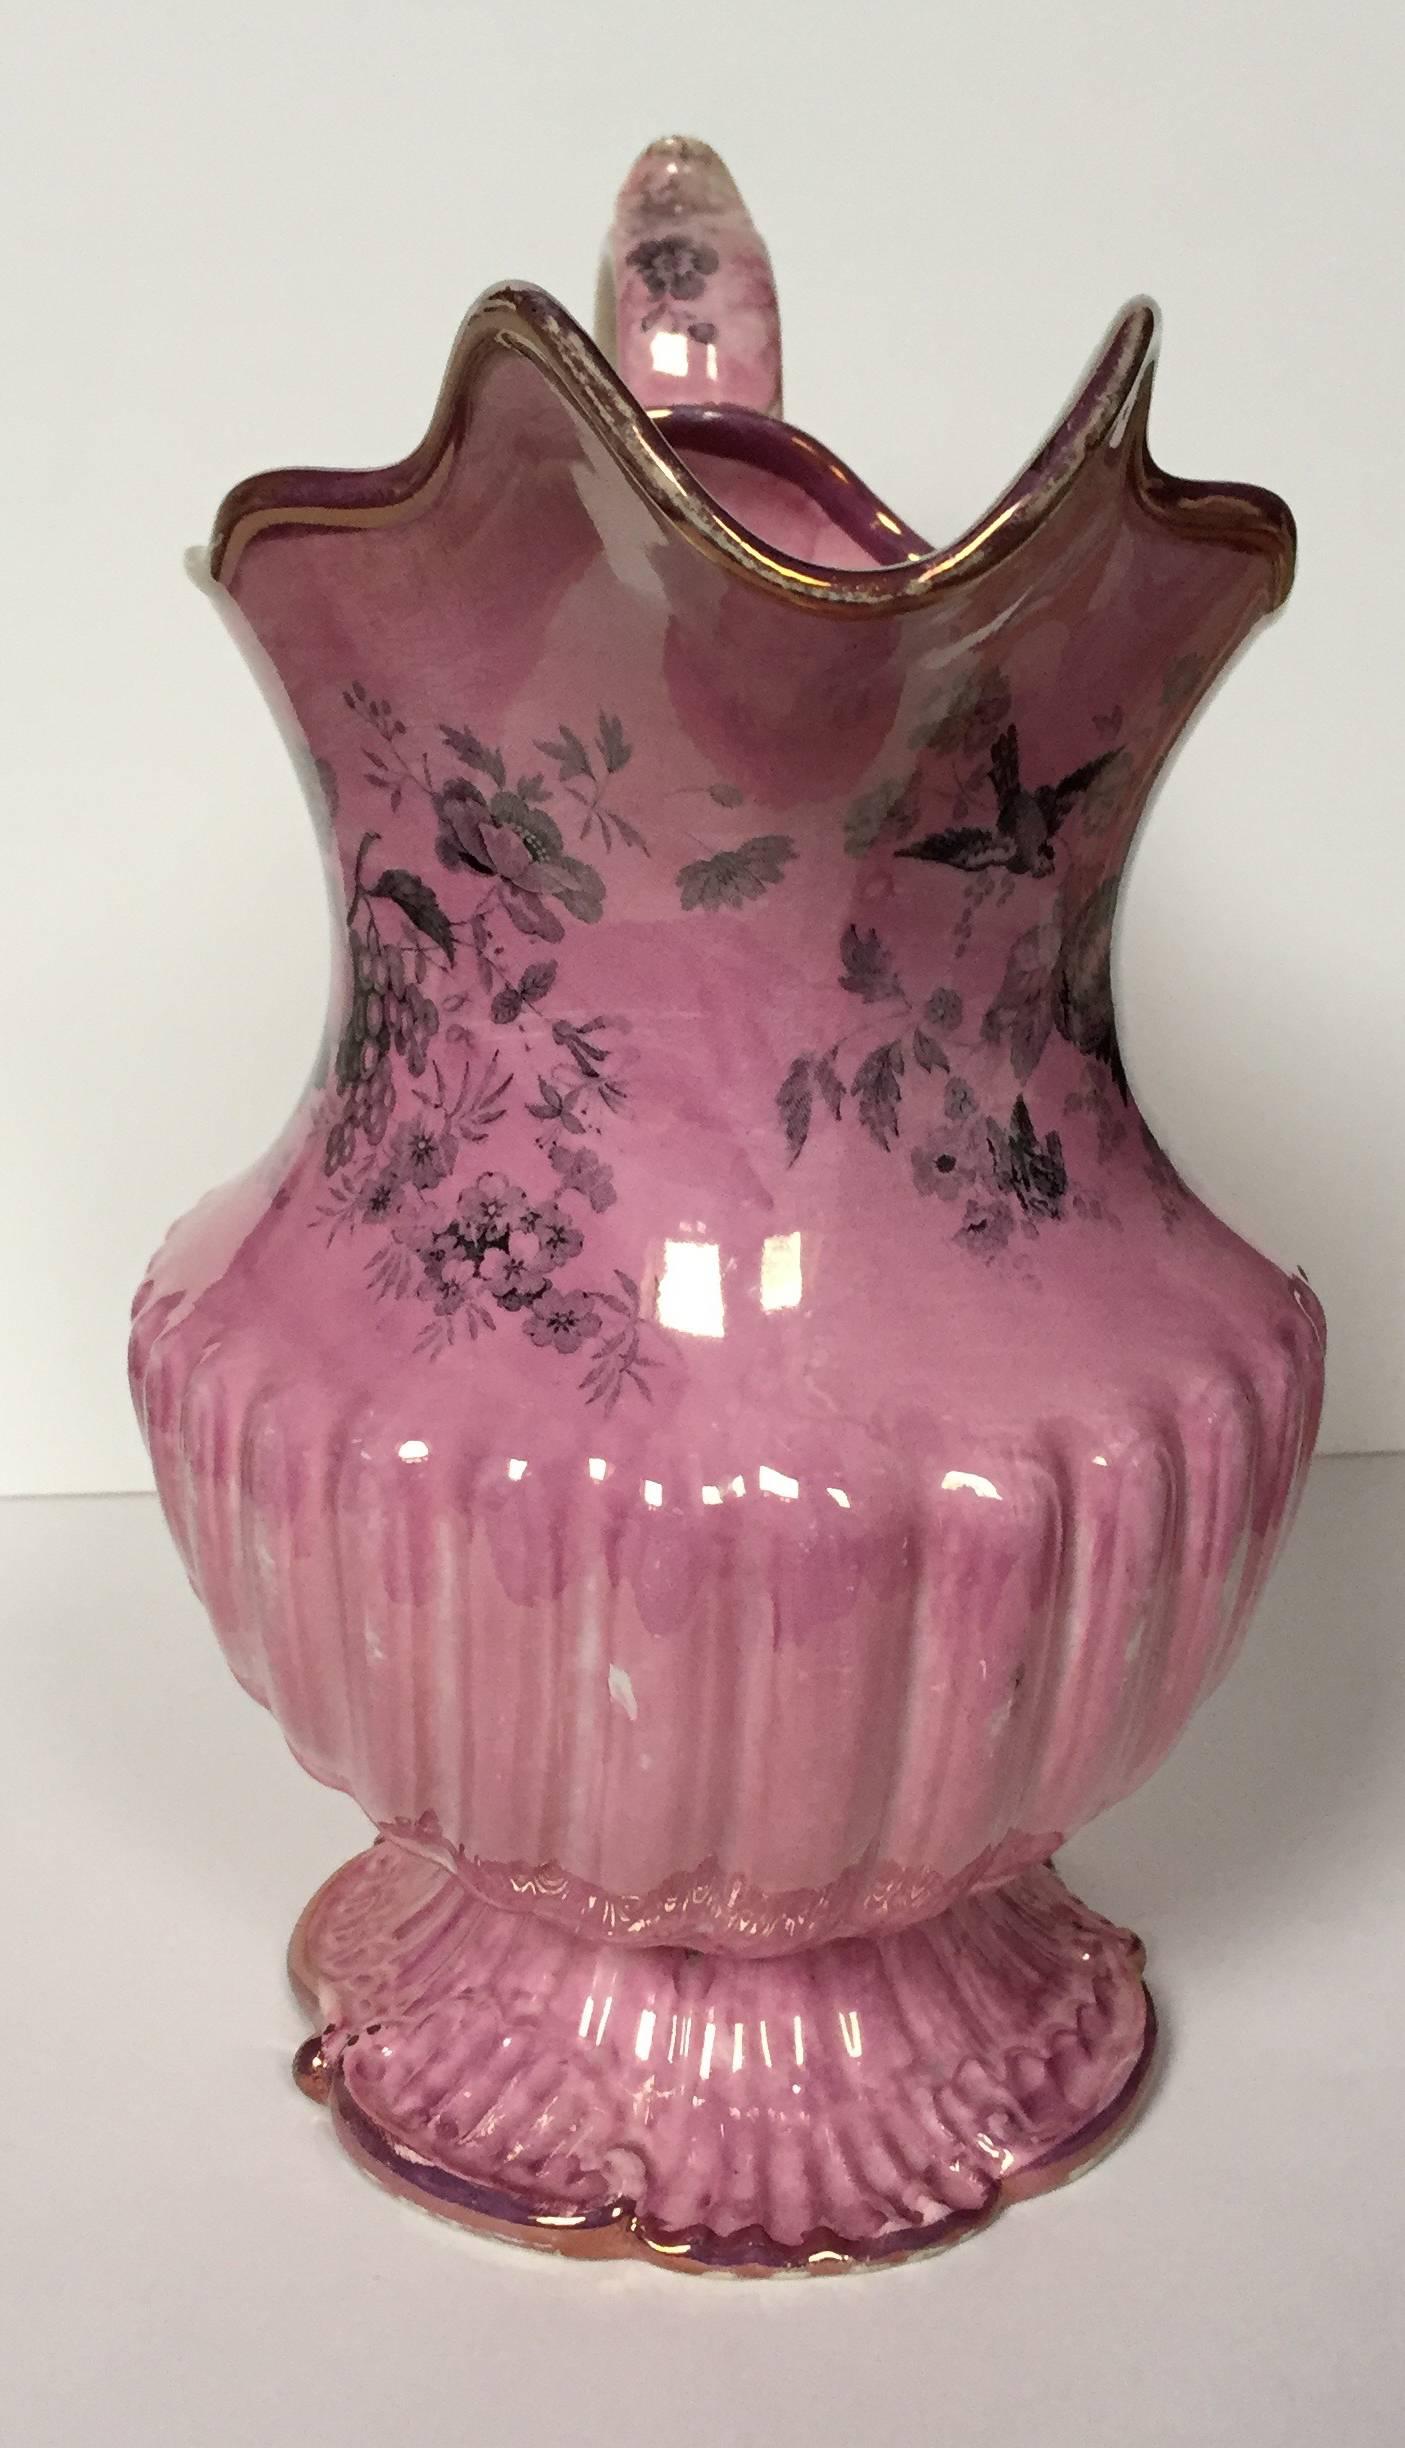 Rococo Staffordshire Pottery Transfer-Printed Pink-Lustreware Shell-Shaped Pitcher For Sale